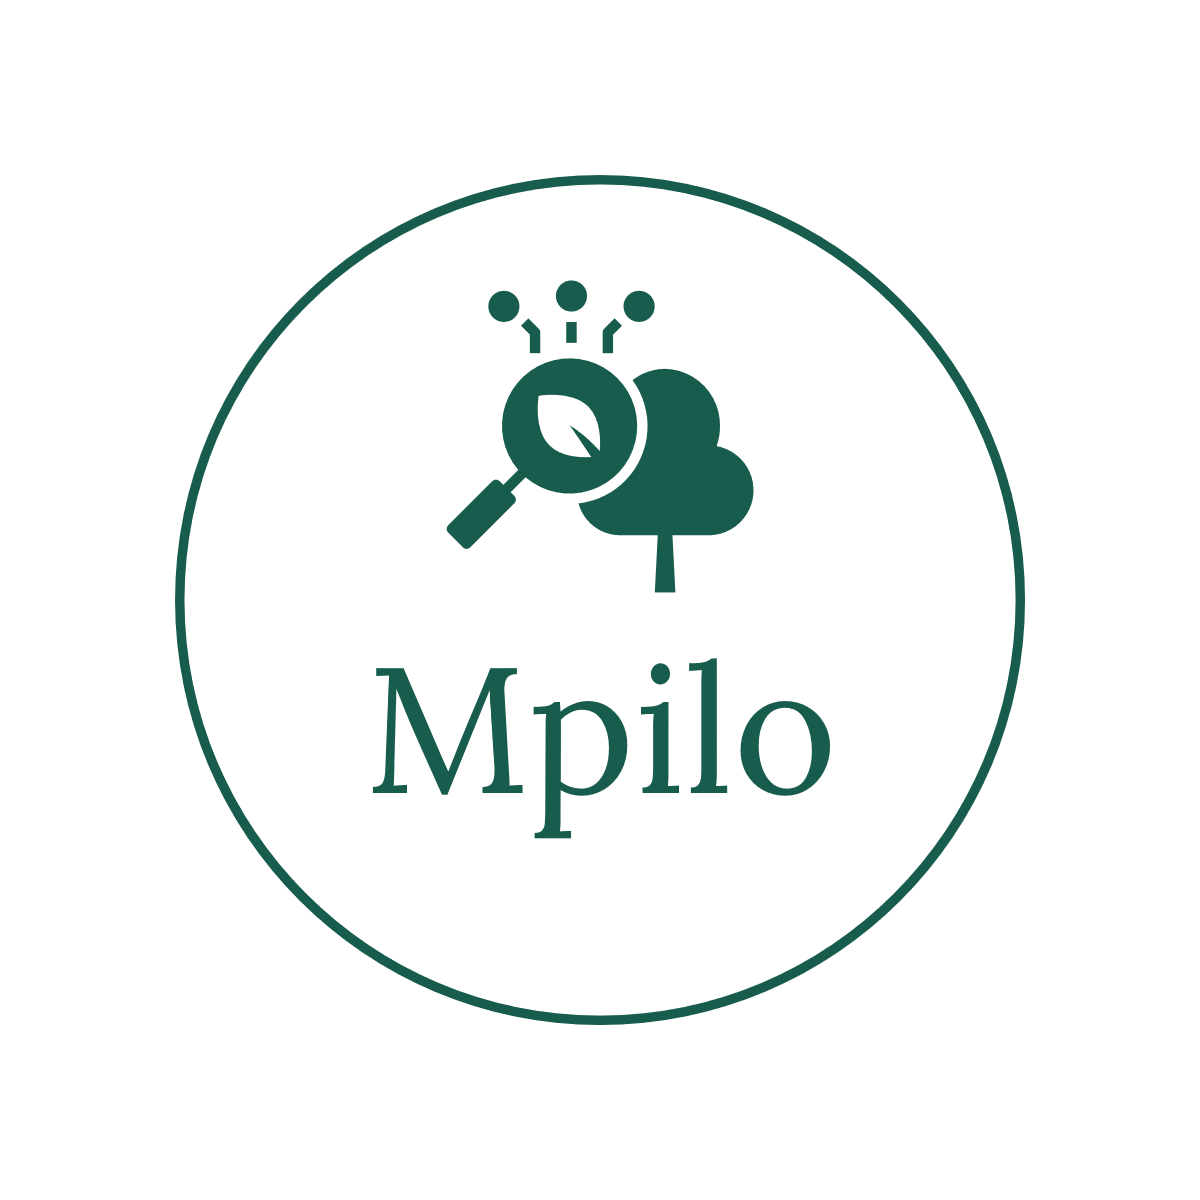 Personal website of Mpilo Khumalo